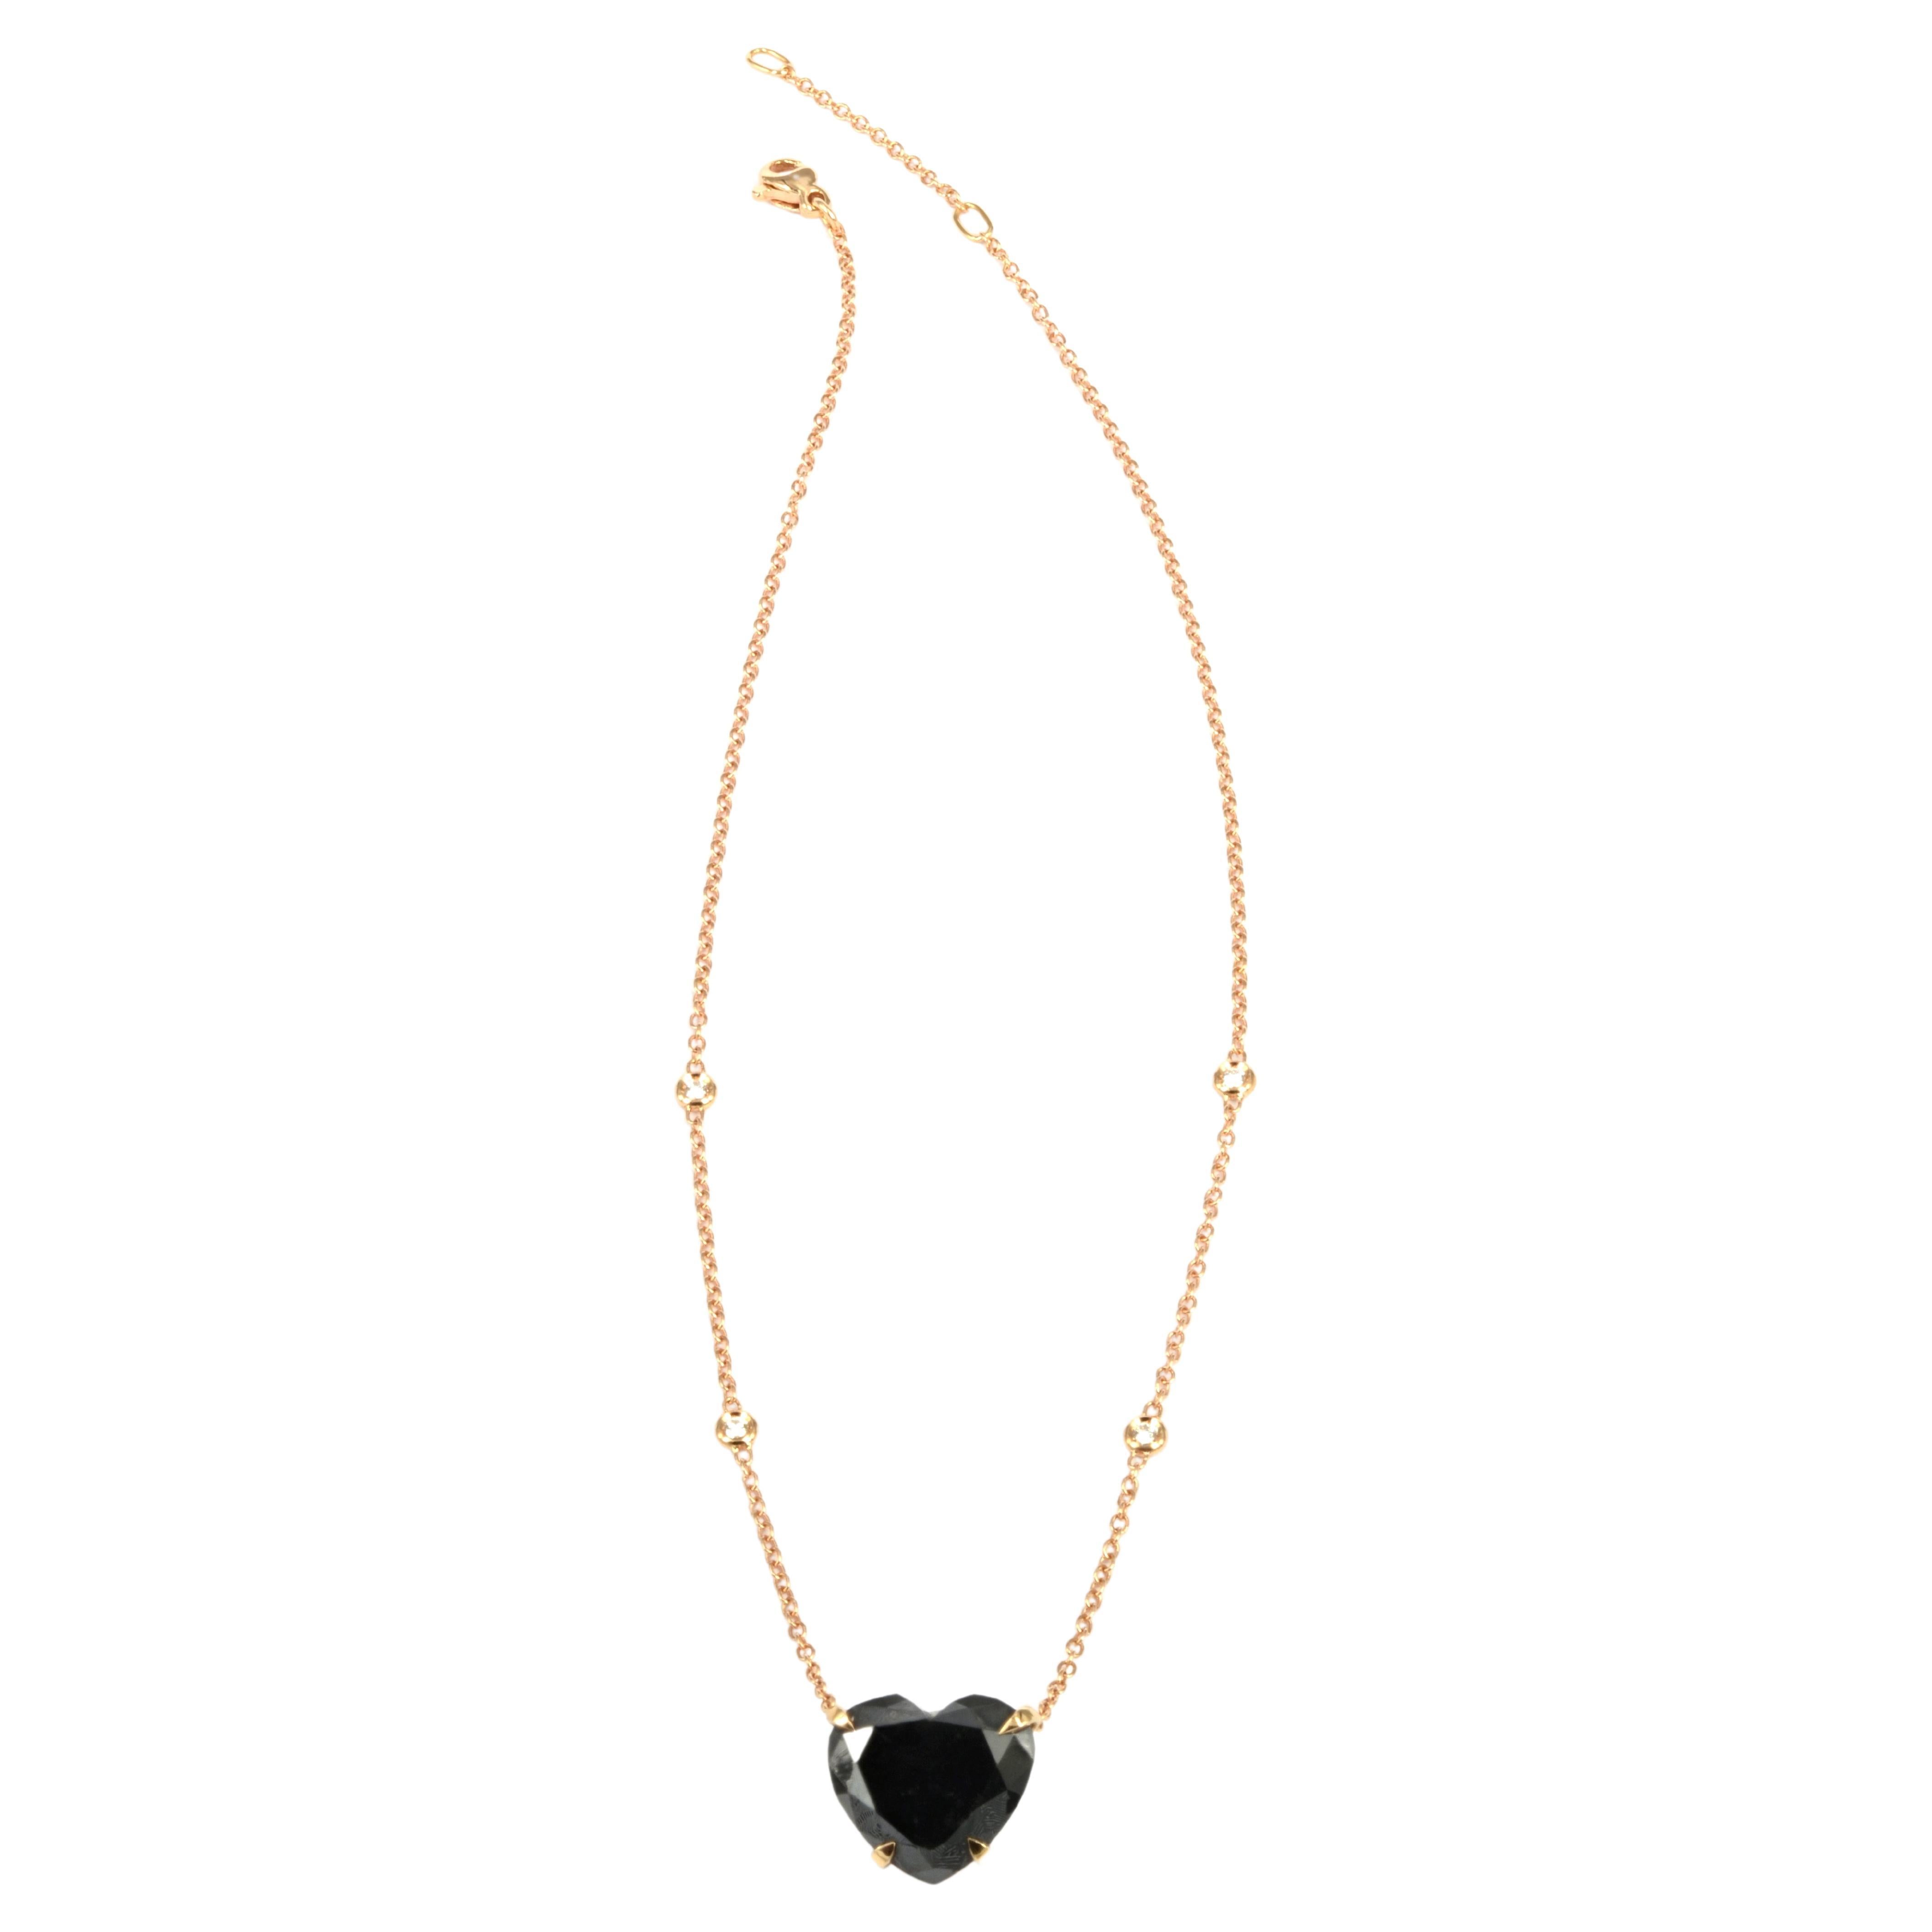 Enchanting heart cut black diamond weighing 11.22 carats mounted in 18 Kt rose gold, on a rose gold chain featuring 
4 spectacol set white round diamonds. A special gift for love!
Unique, different, rock, yest classic and forever chic.
We suggest to